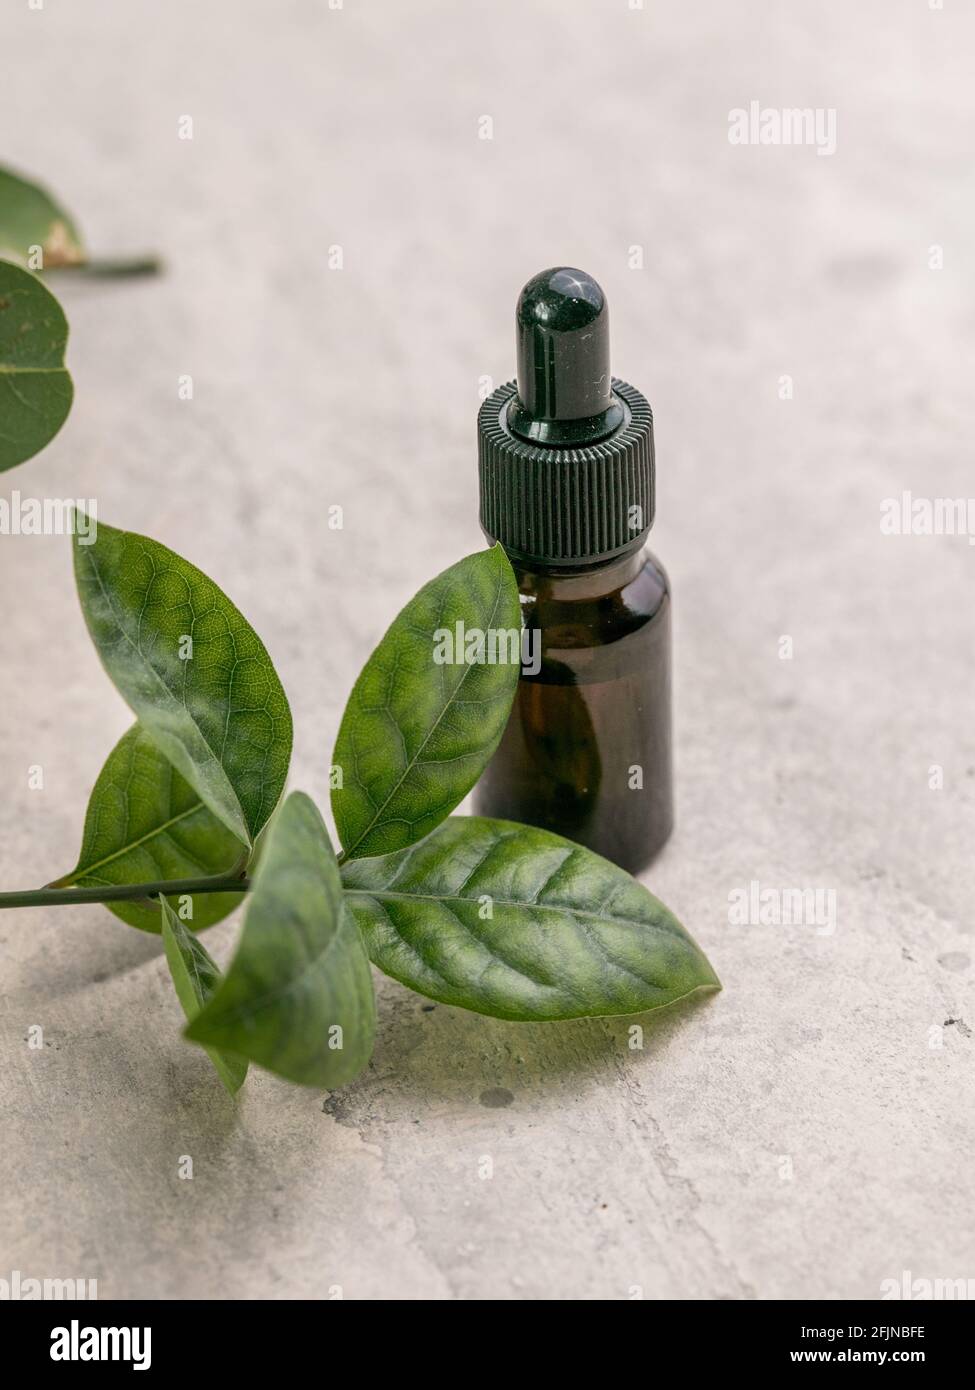 glass bottle of essential bay laurel oil with daphne leaves. Healthy lifestyle spa, therapy concept. Stock Photo